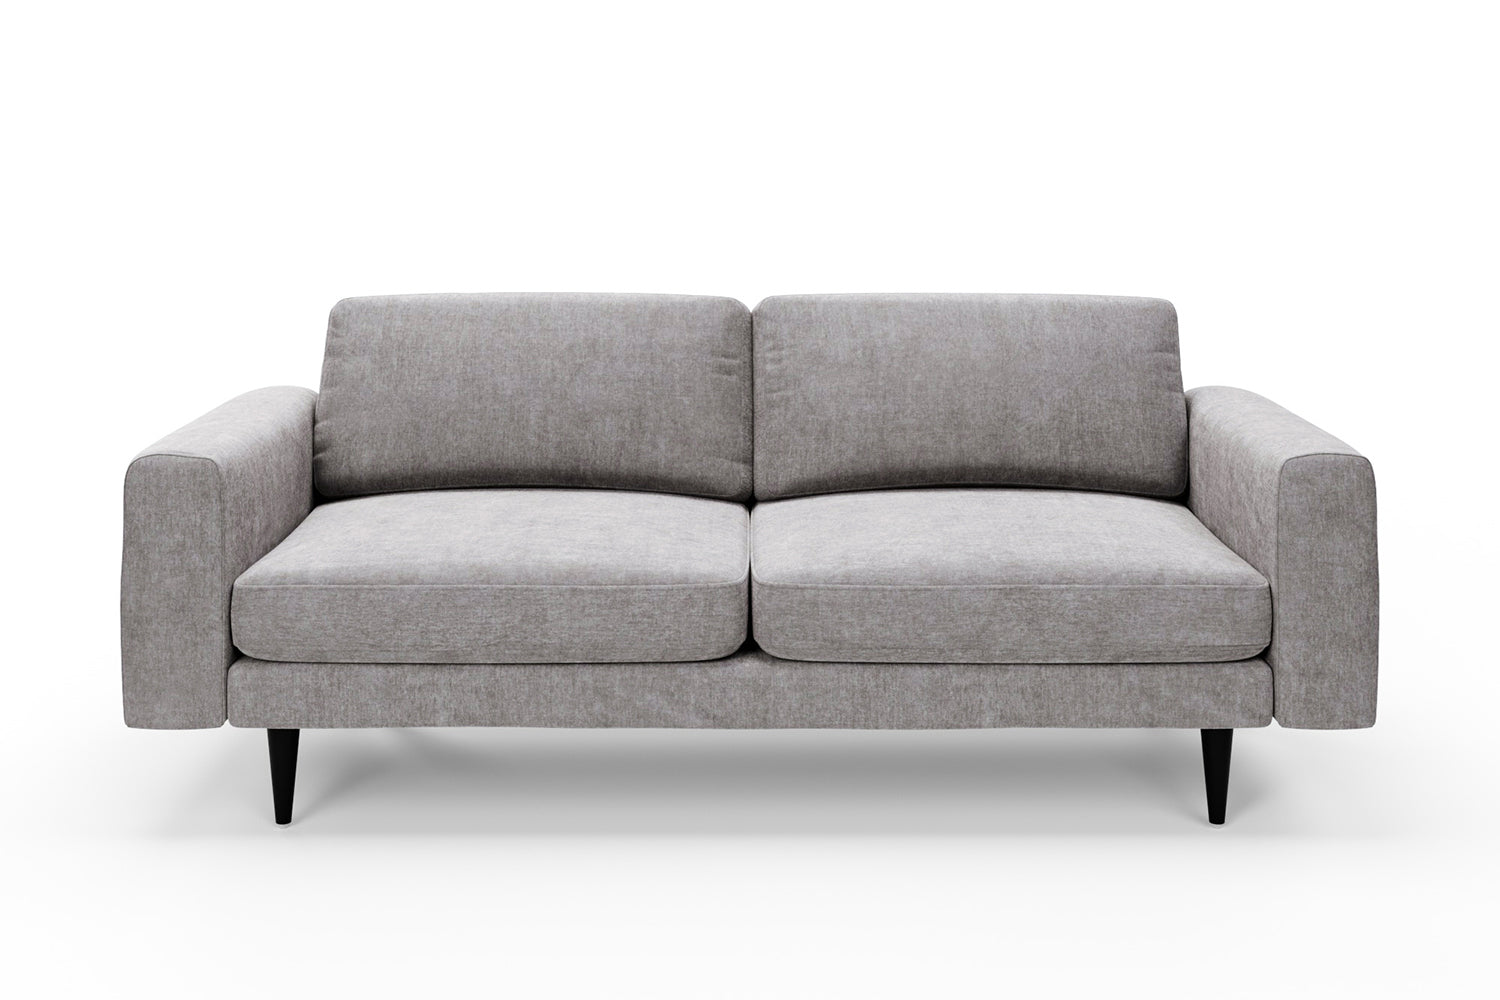 SNUG | The Big Chill 3 Seater Sofa in Mid Grey variant_40414878629936